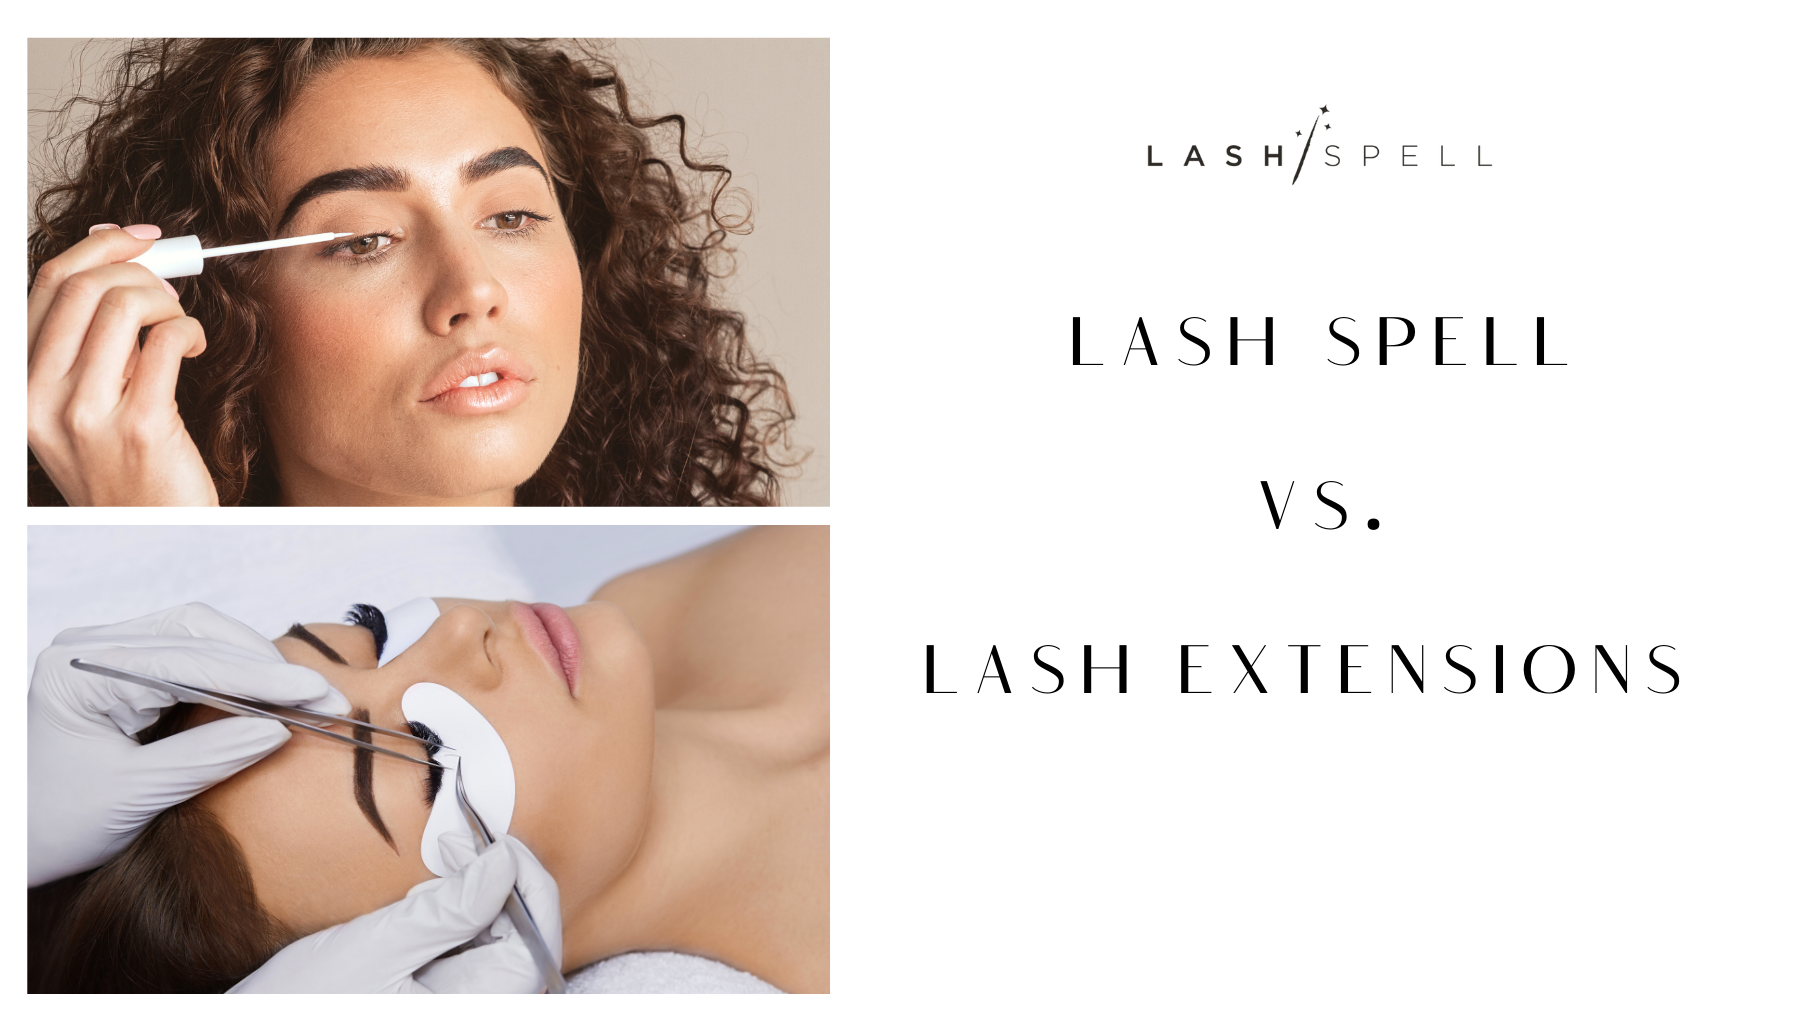 Lash Spell Vs. Lash Extensions: Which is the Better Option?